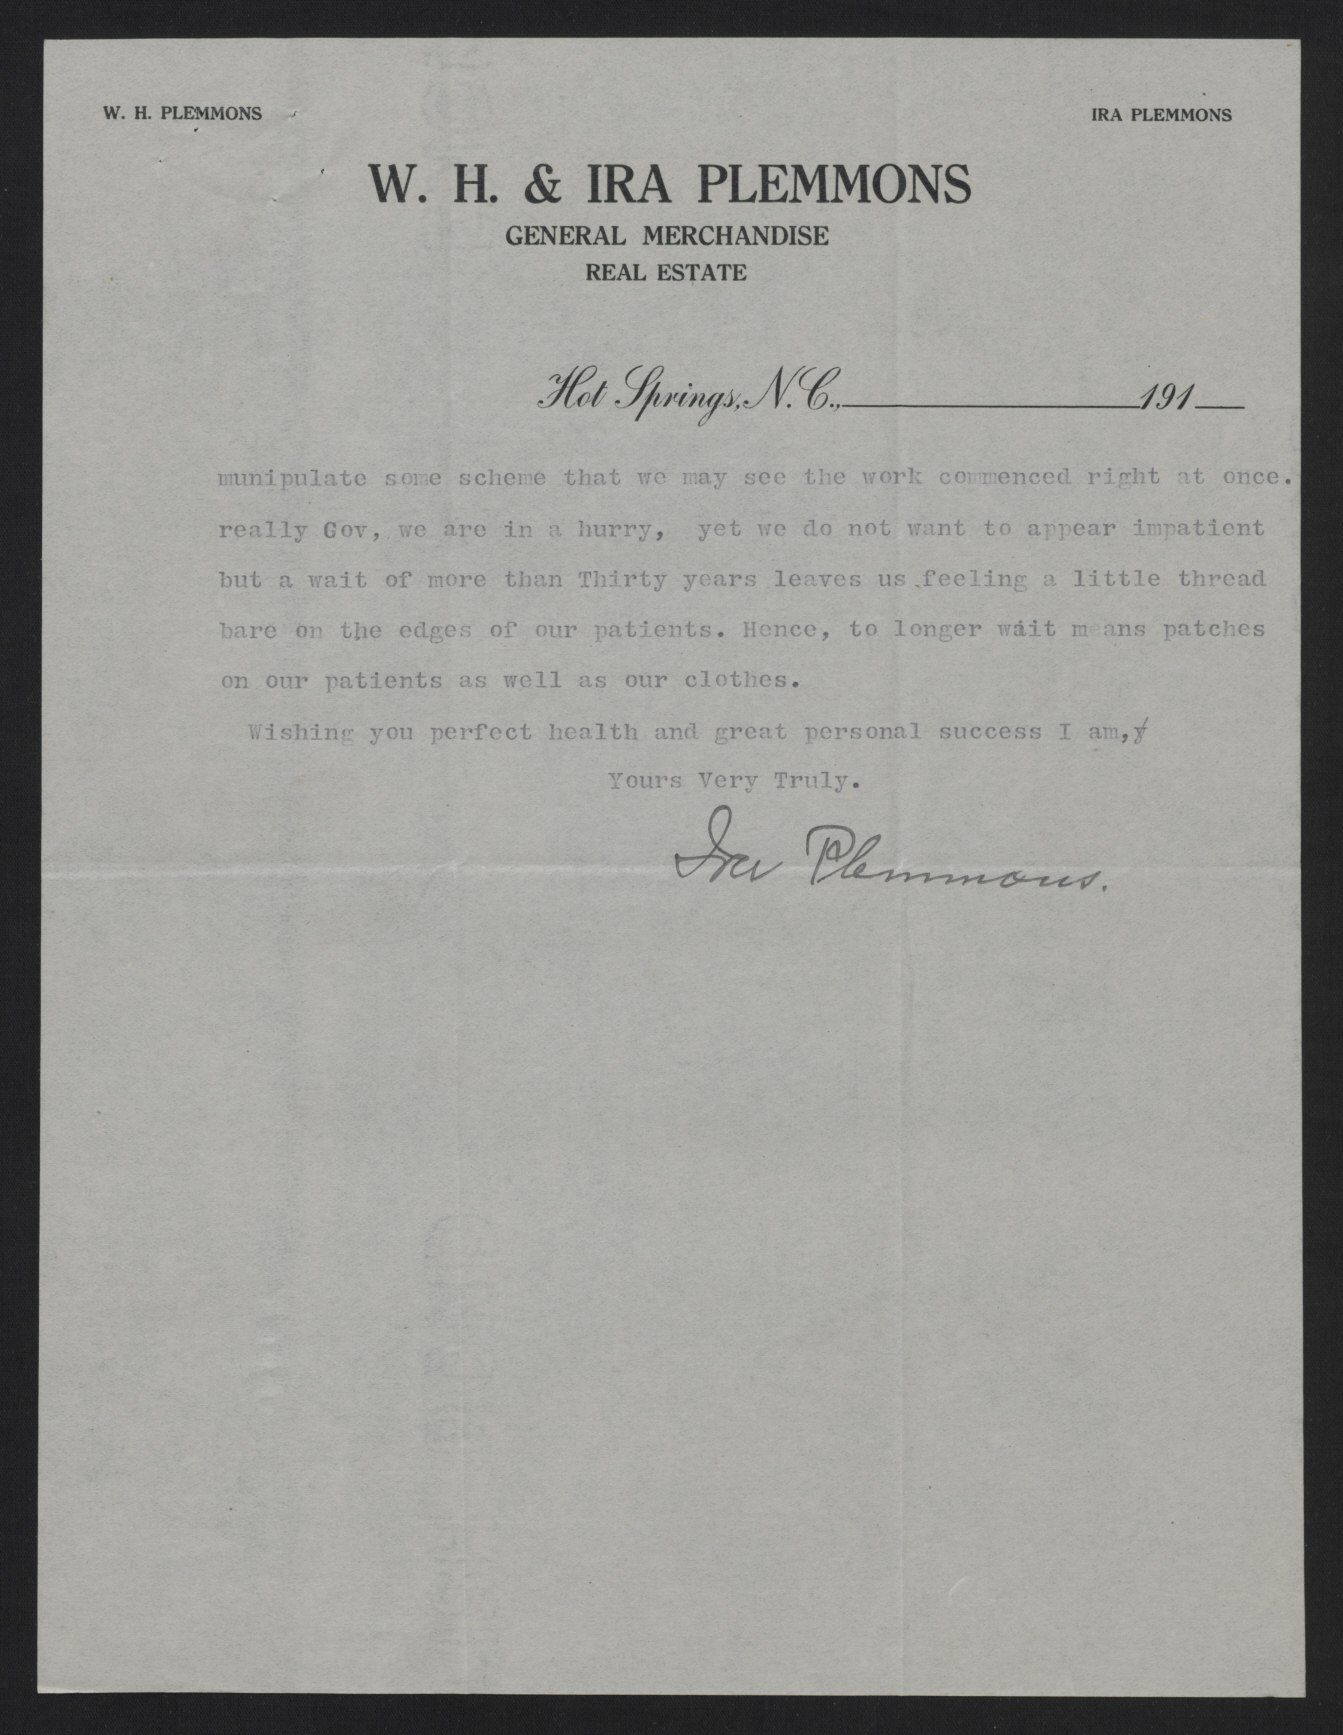 Letter from Plemmons to Craig, July 16, 1913, page 2